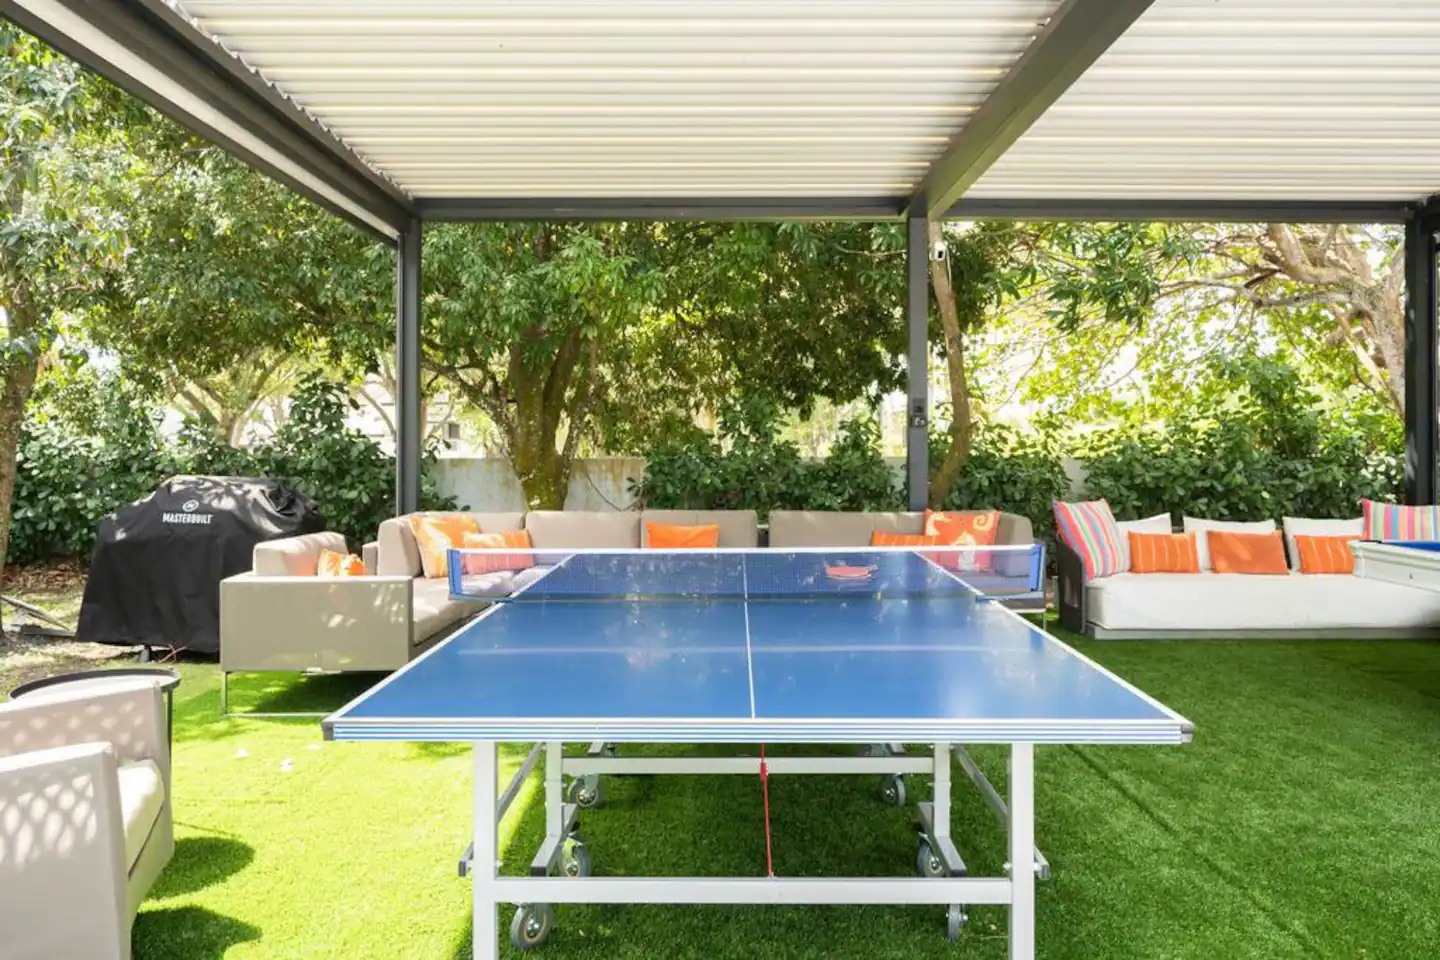 Enjoy a game of pool or table tennis under the shady patio